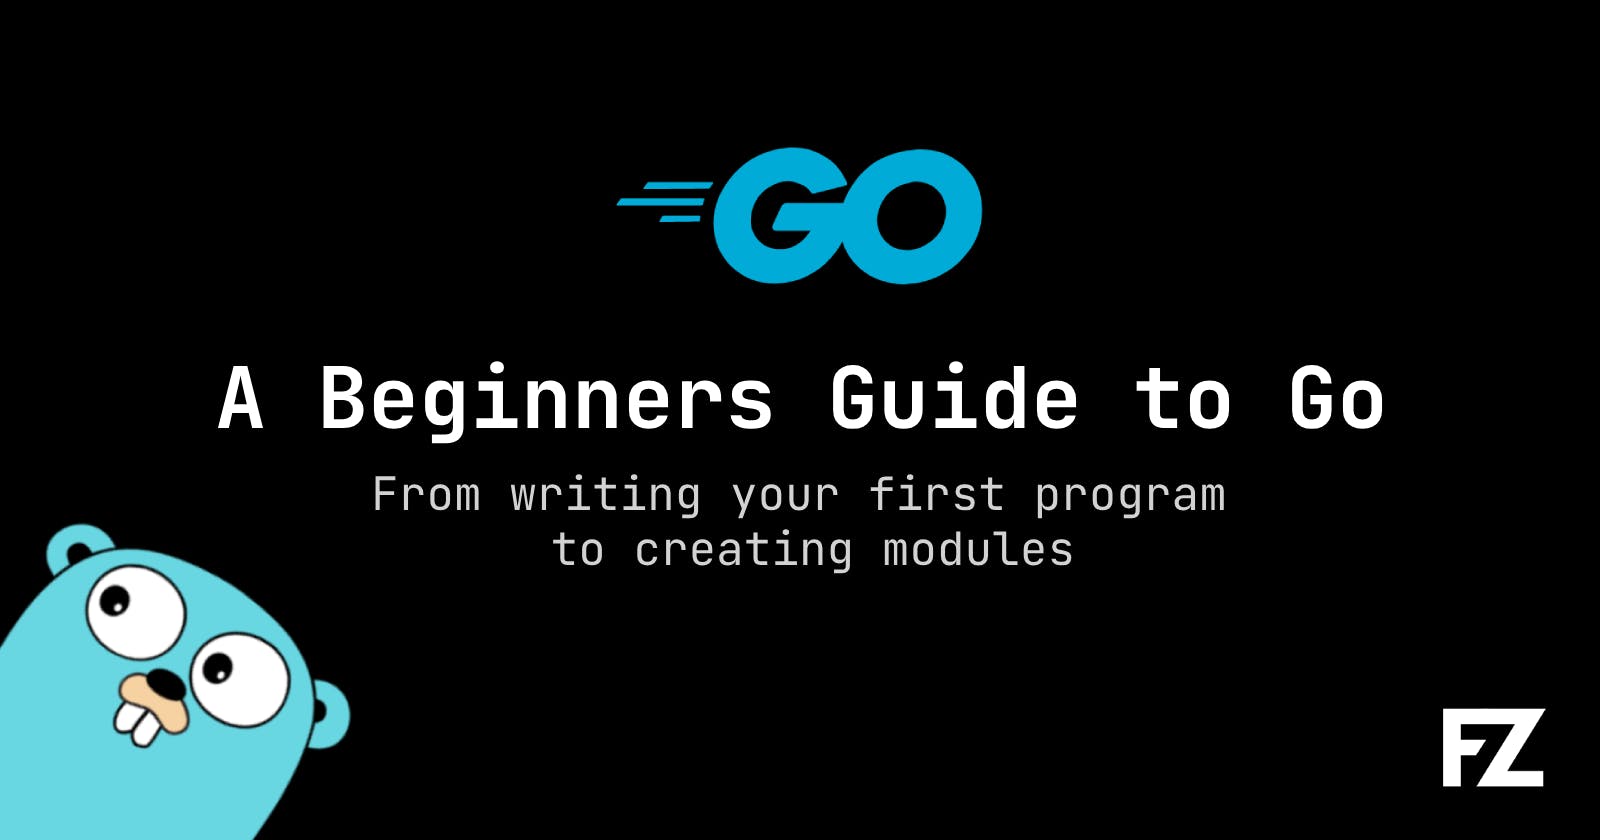 A Beginner's Guide to Go